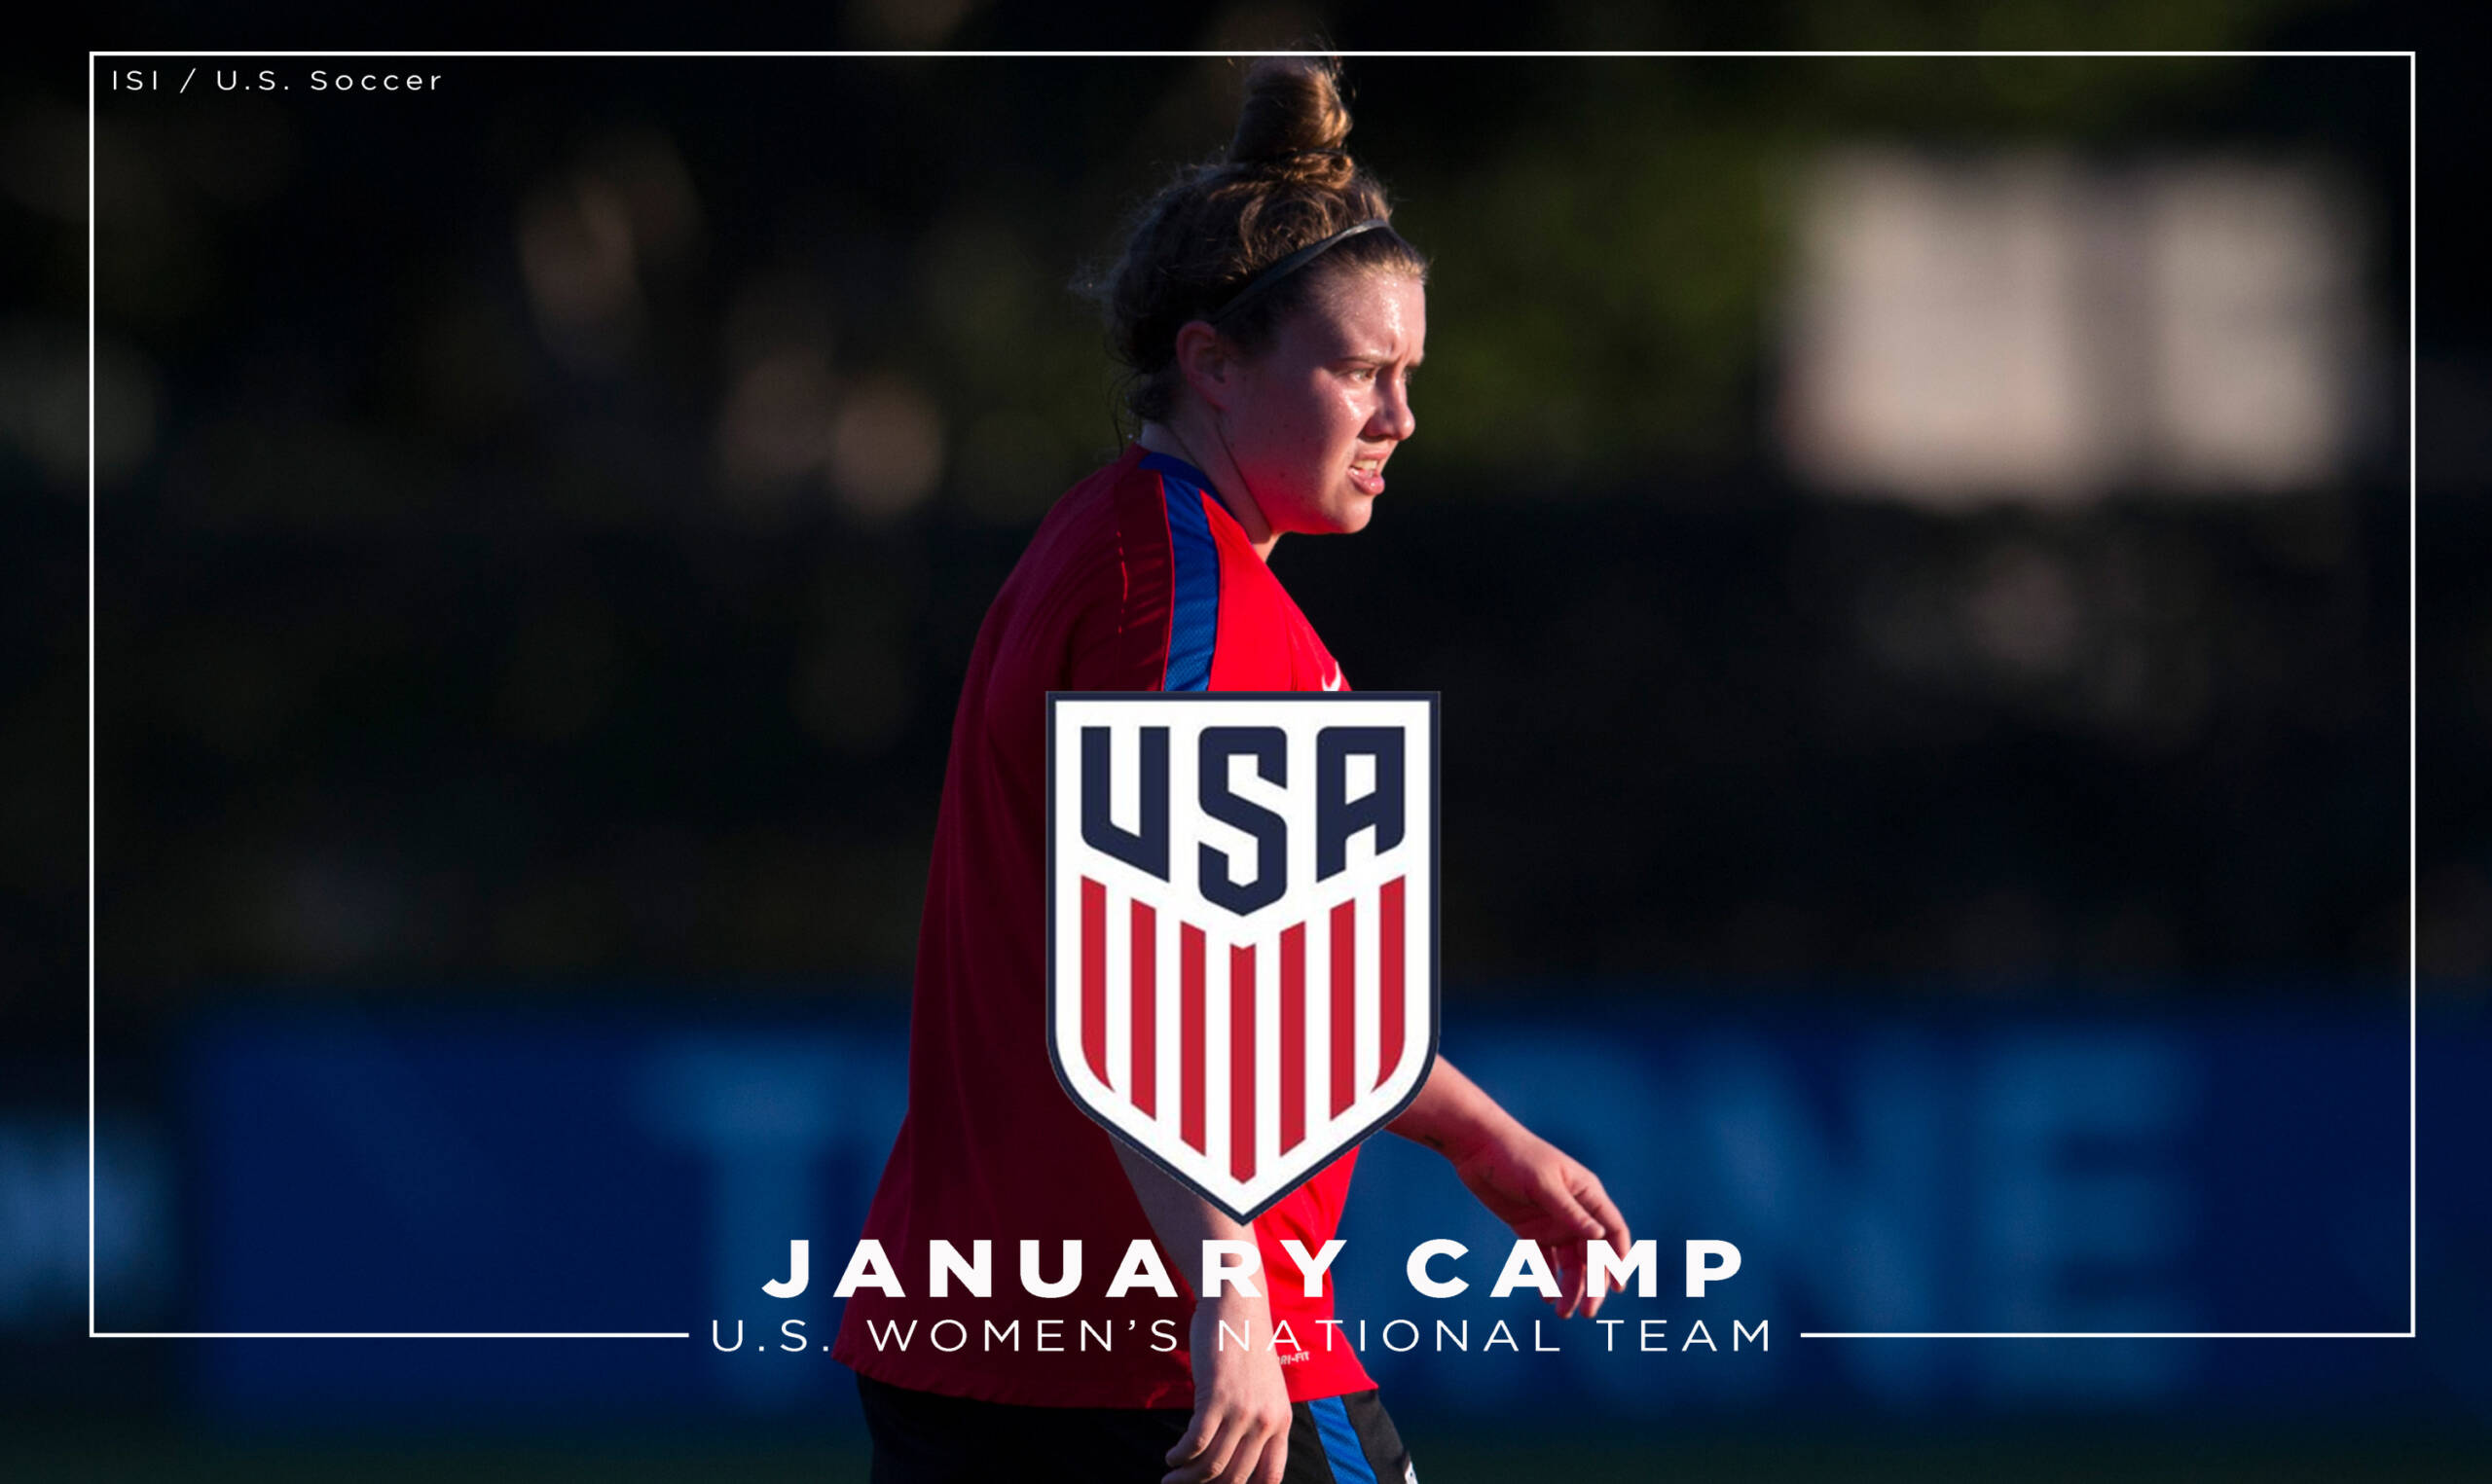 McCaskill To Compete At USWNT’s January Camp University of South